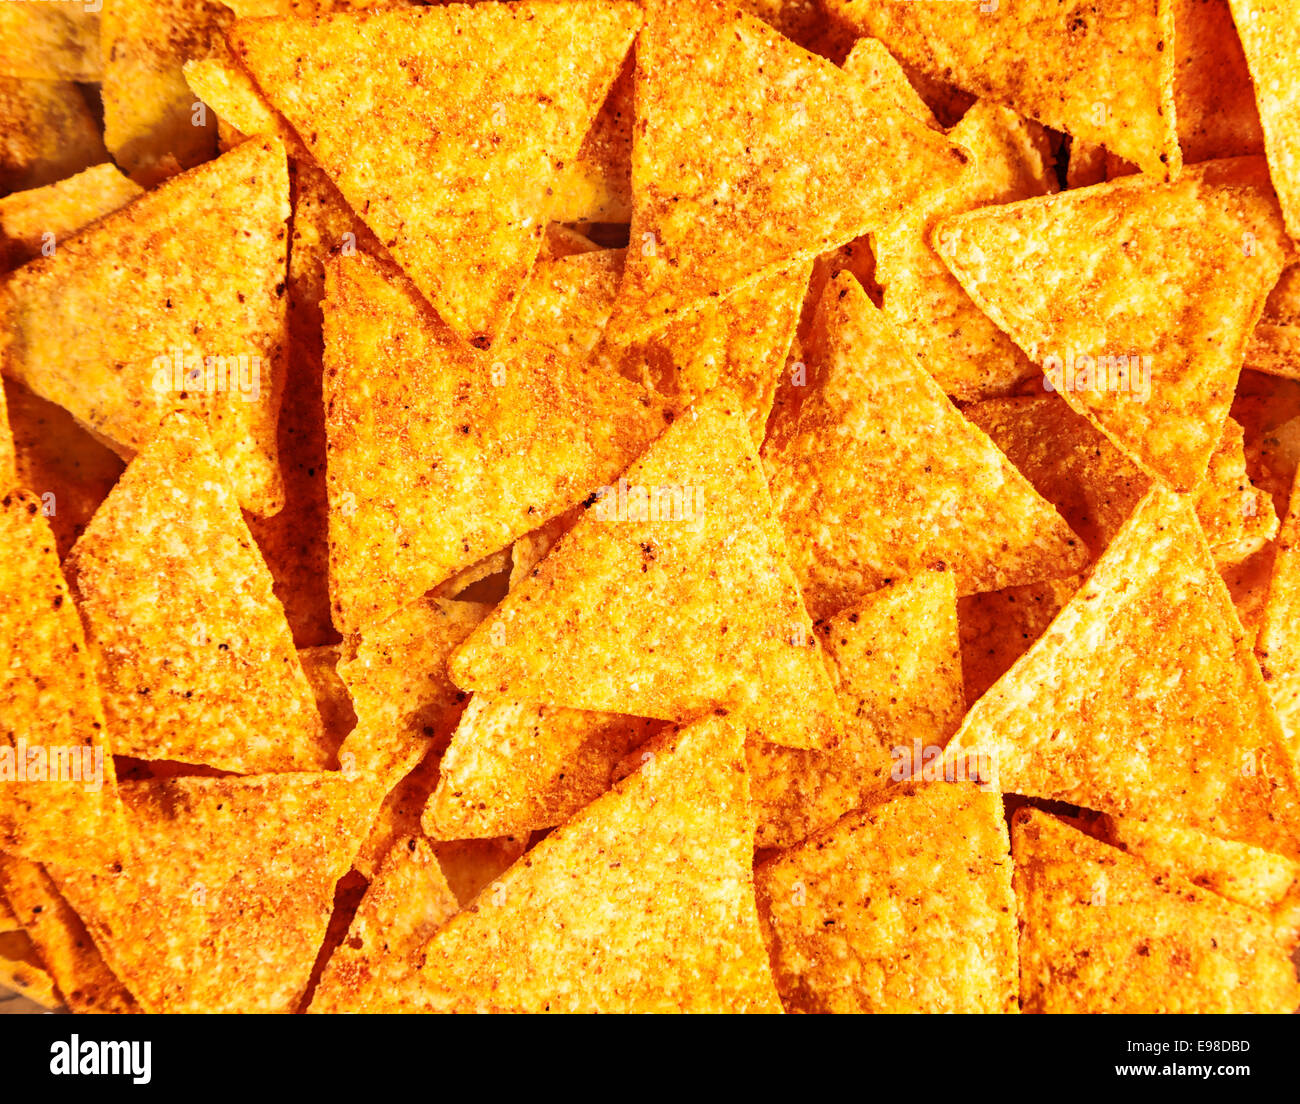 Background of crisp crunchy spicy corn tortillas or nachos with their ditsinctive triangular shape for a tasty snack Stock Photo